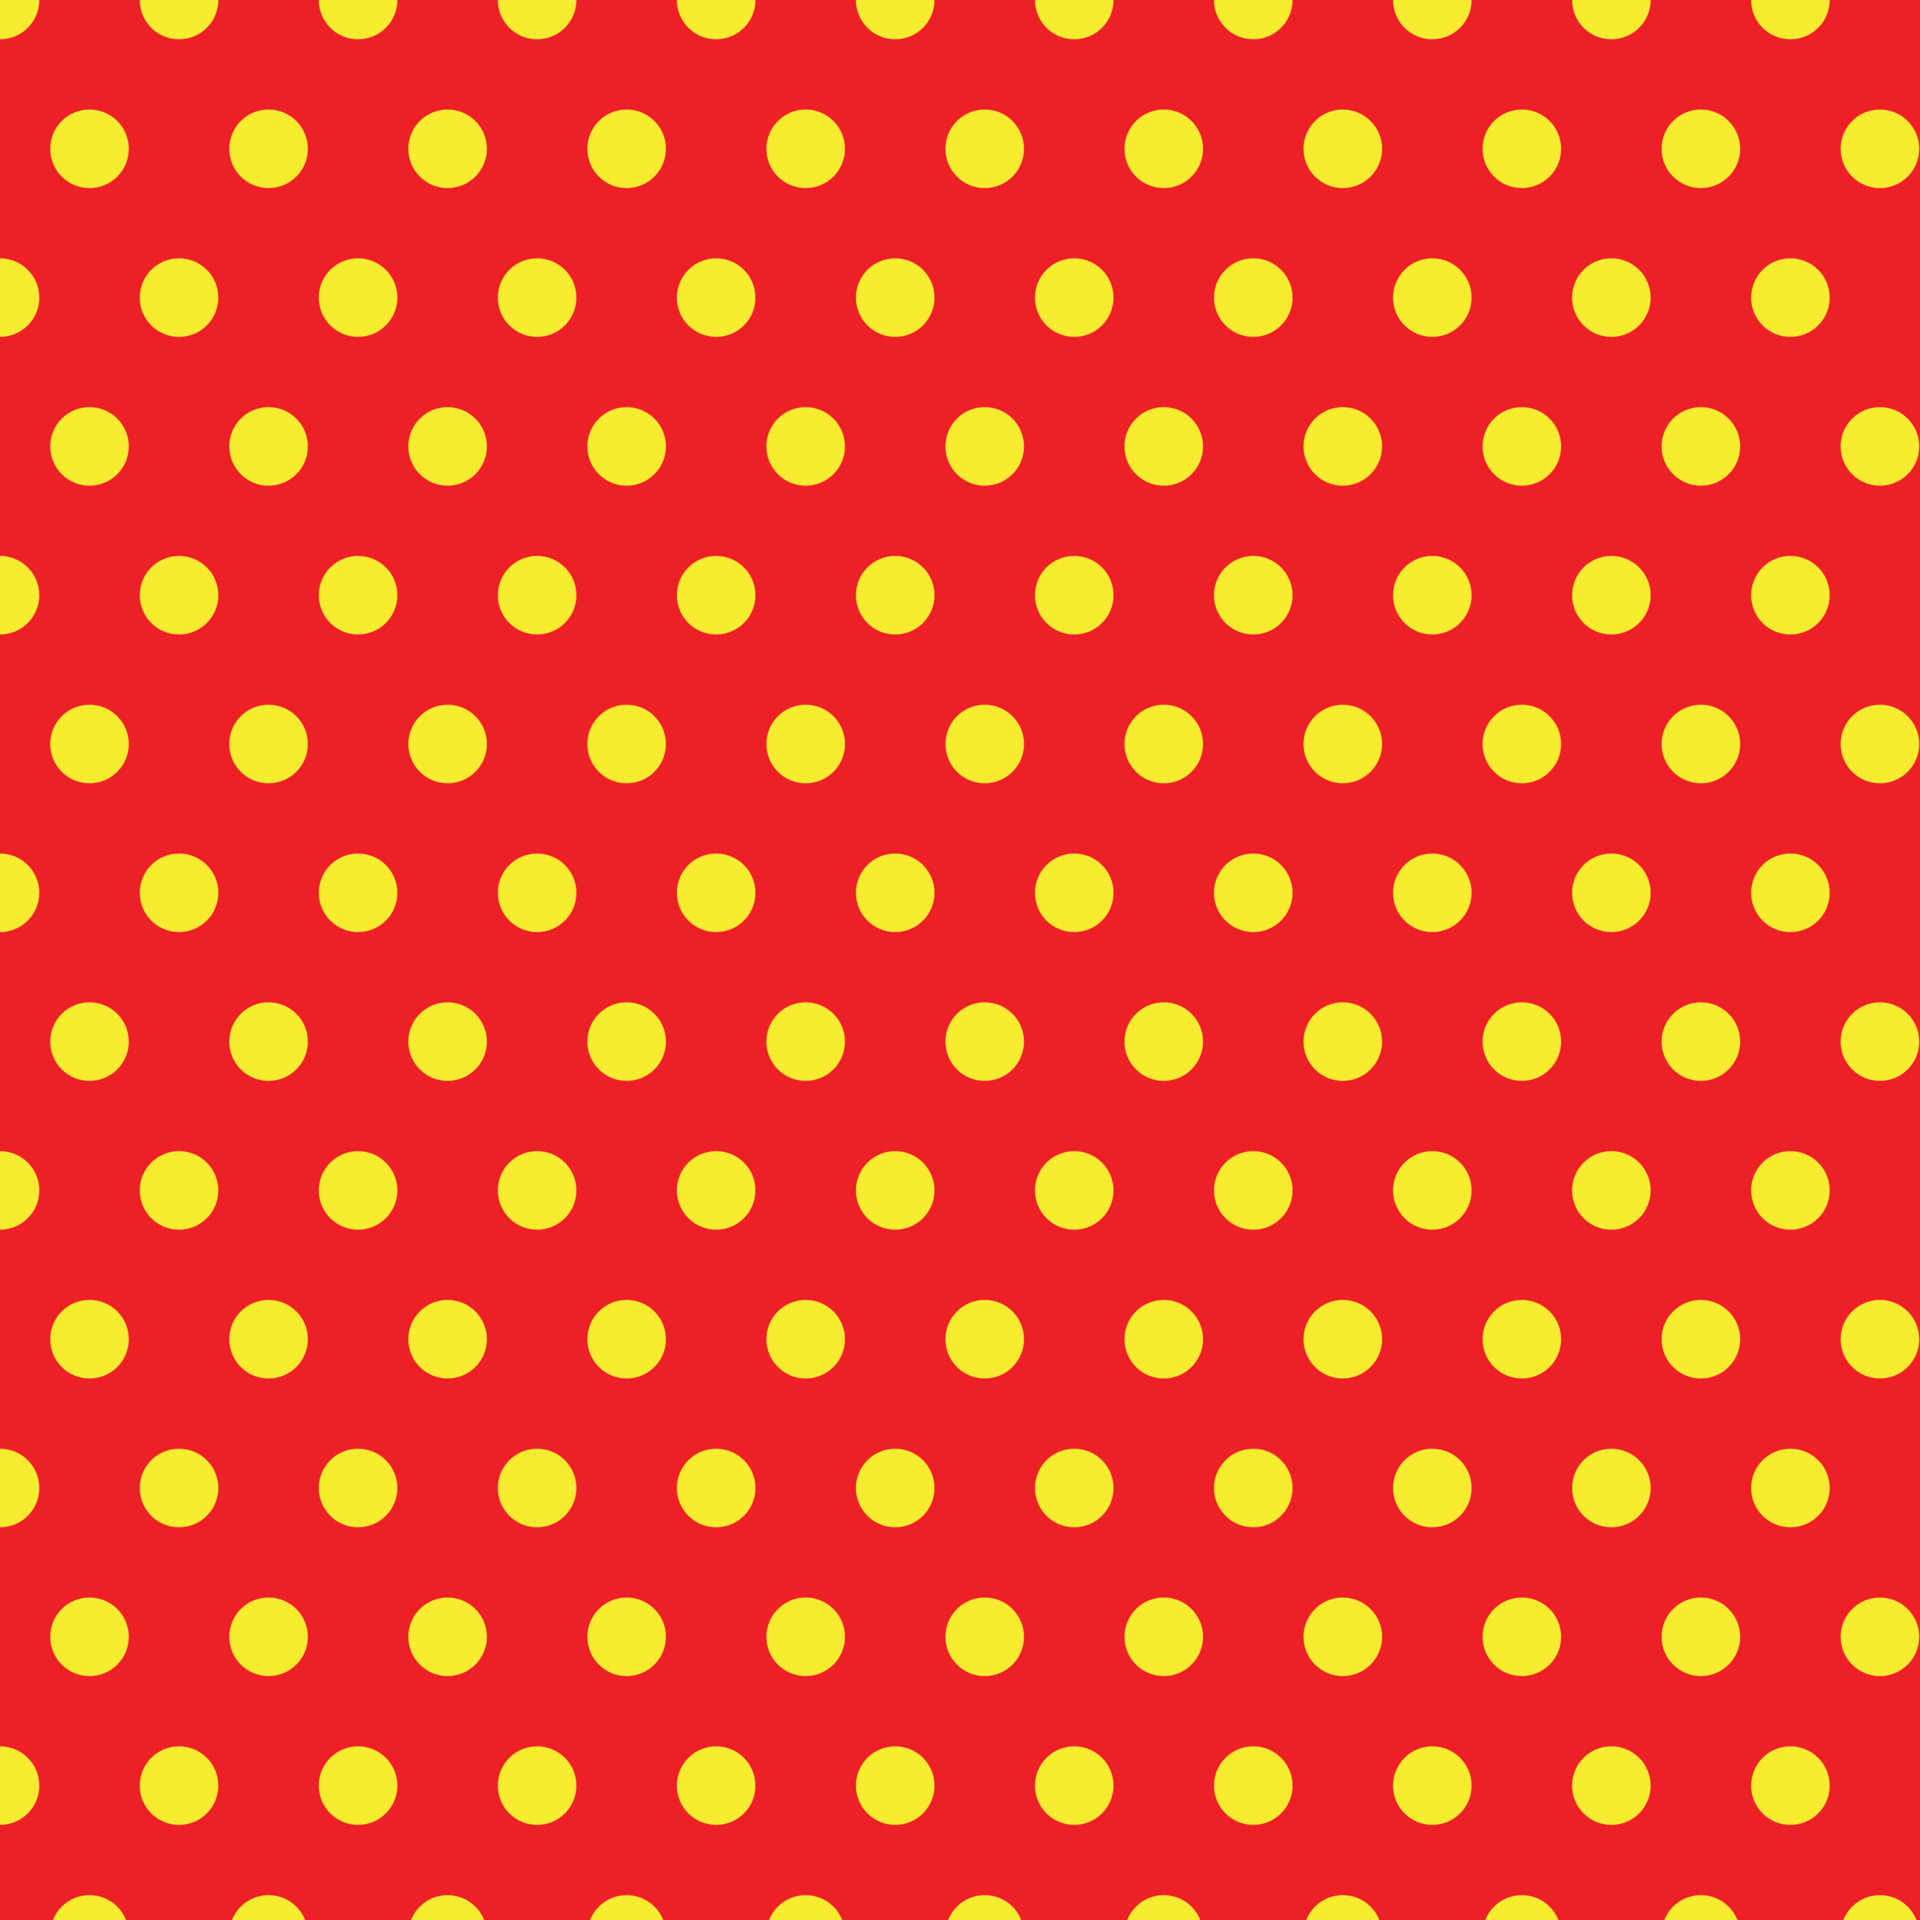 https://static.vecteezy.com/system/resources/previews/023/738/759/original/yellow-polka-dot-pattern-on-red-background-free-vector.jpg